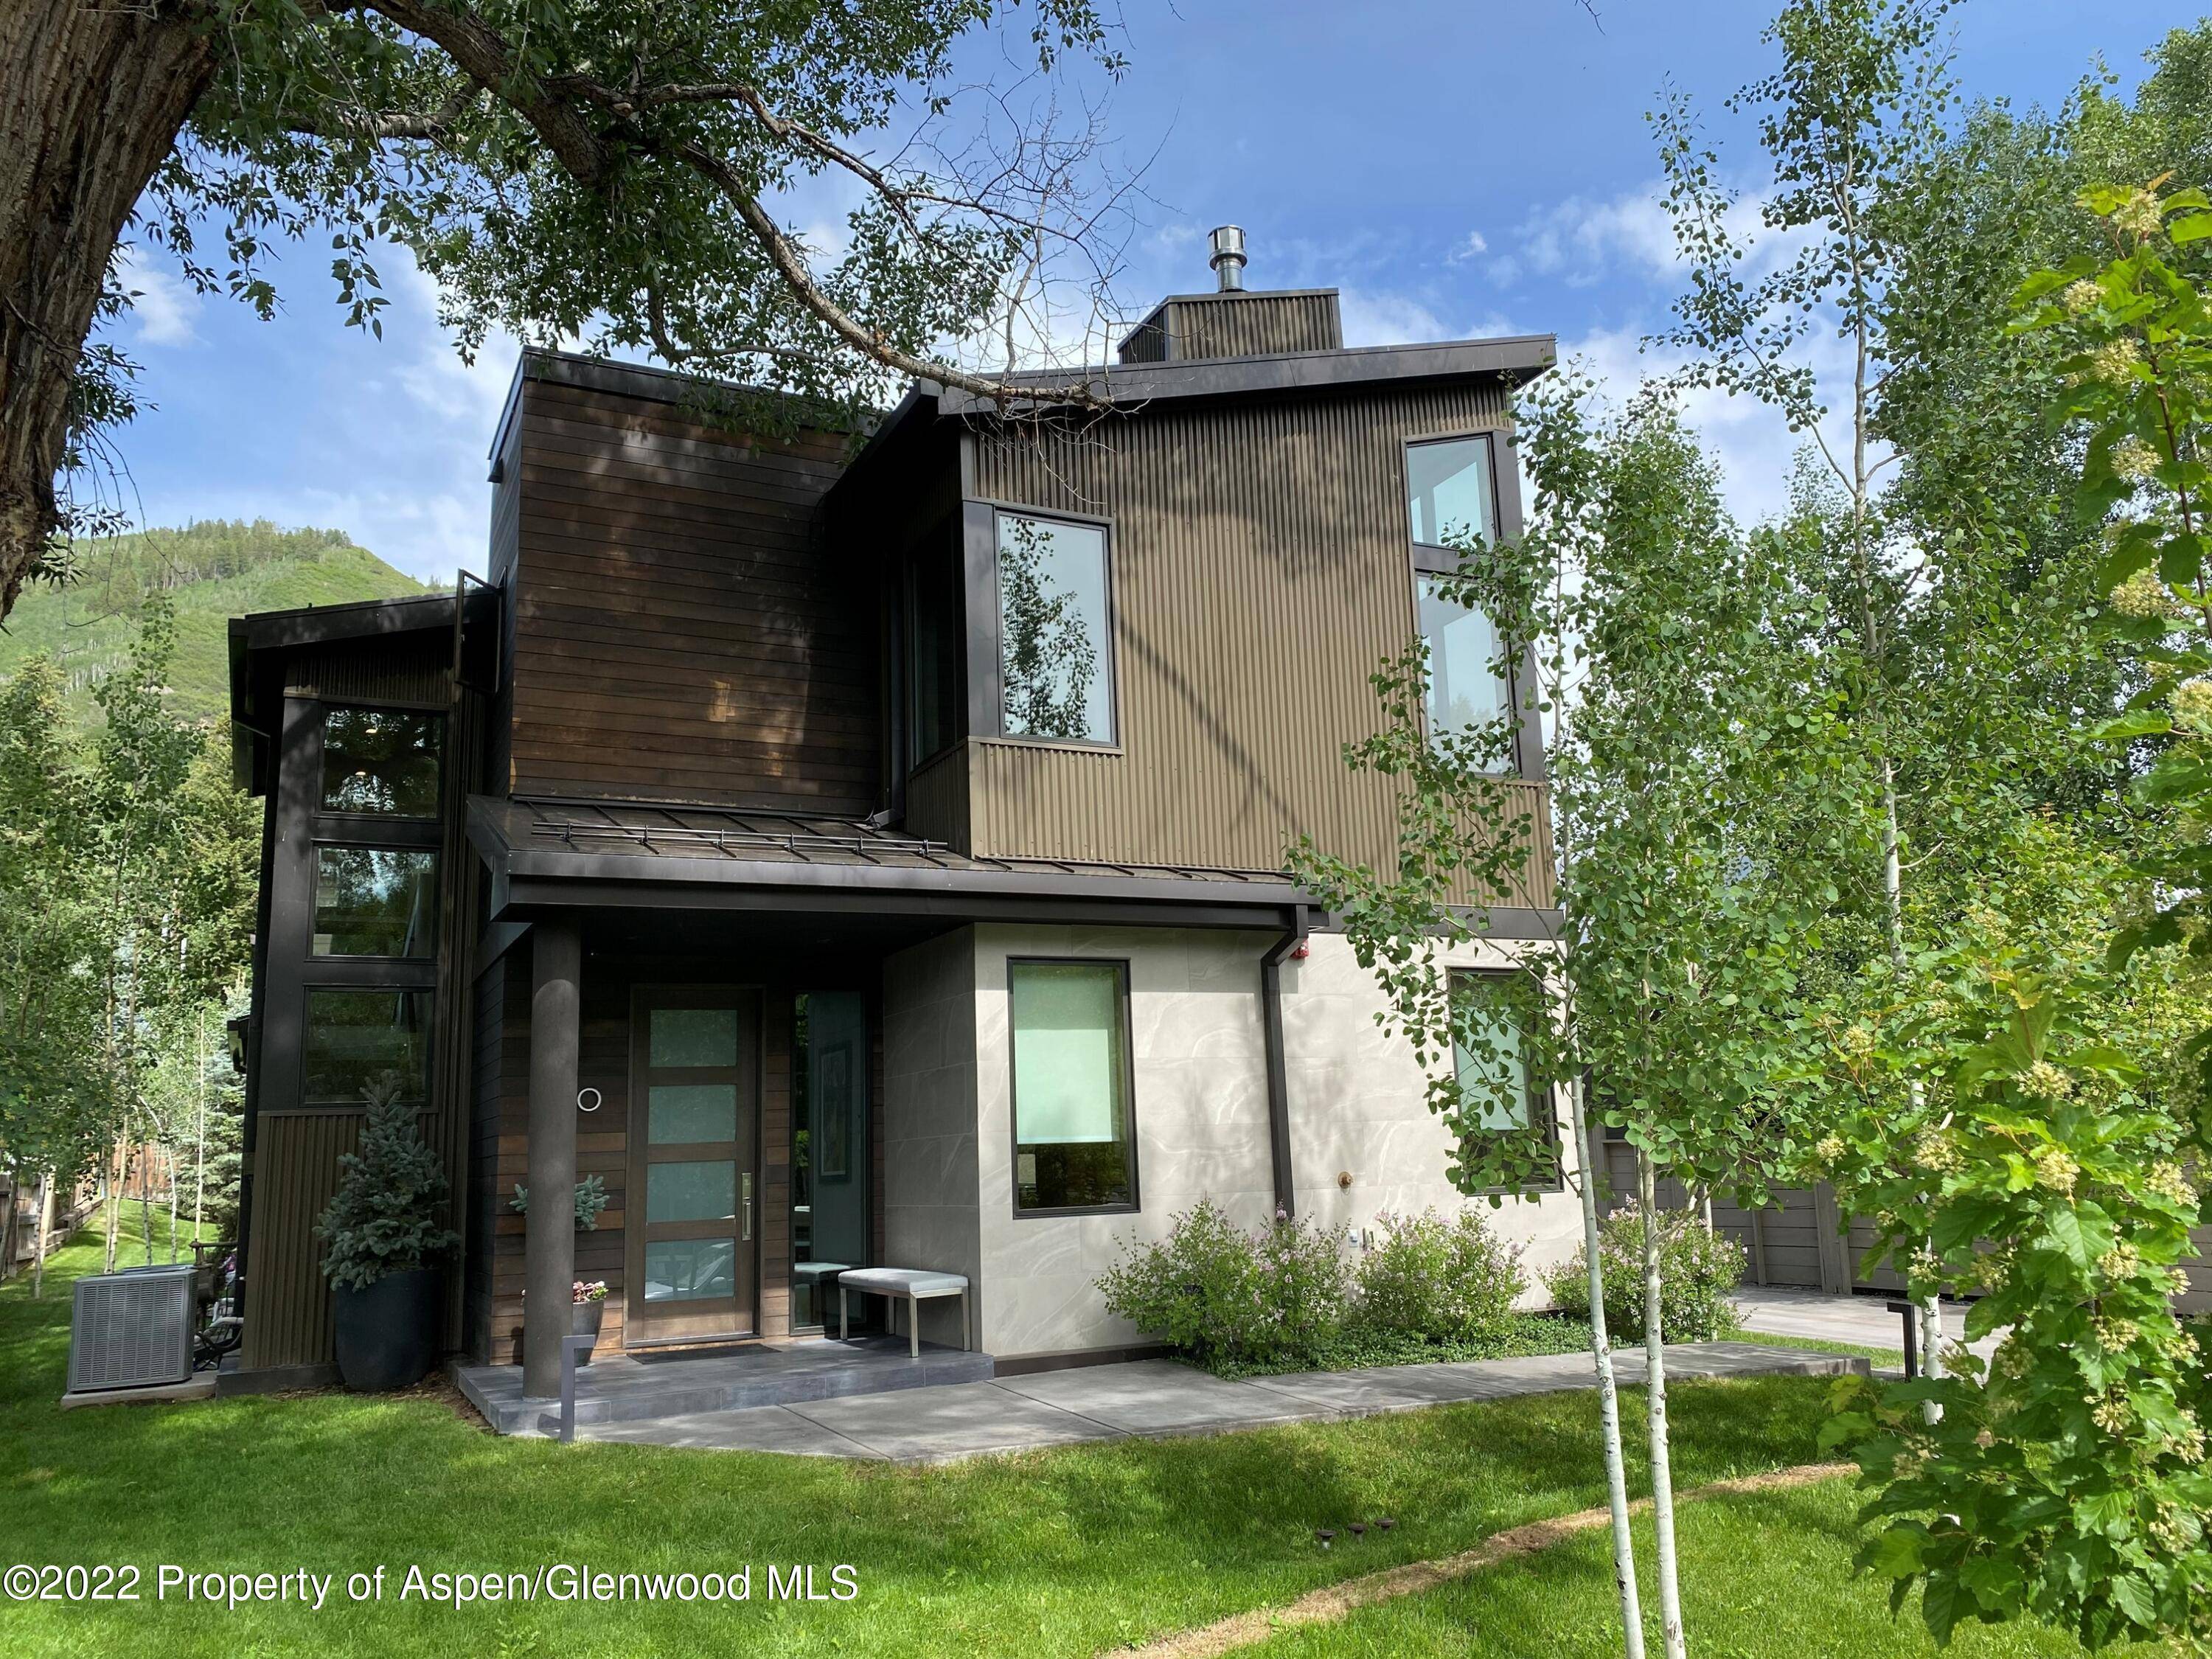 This contemporary 4 bedroom duplex lives like a single family home and is located on the North side of Aspen.